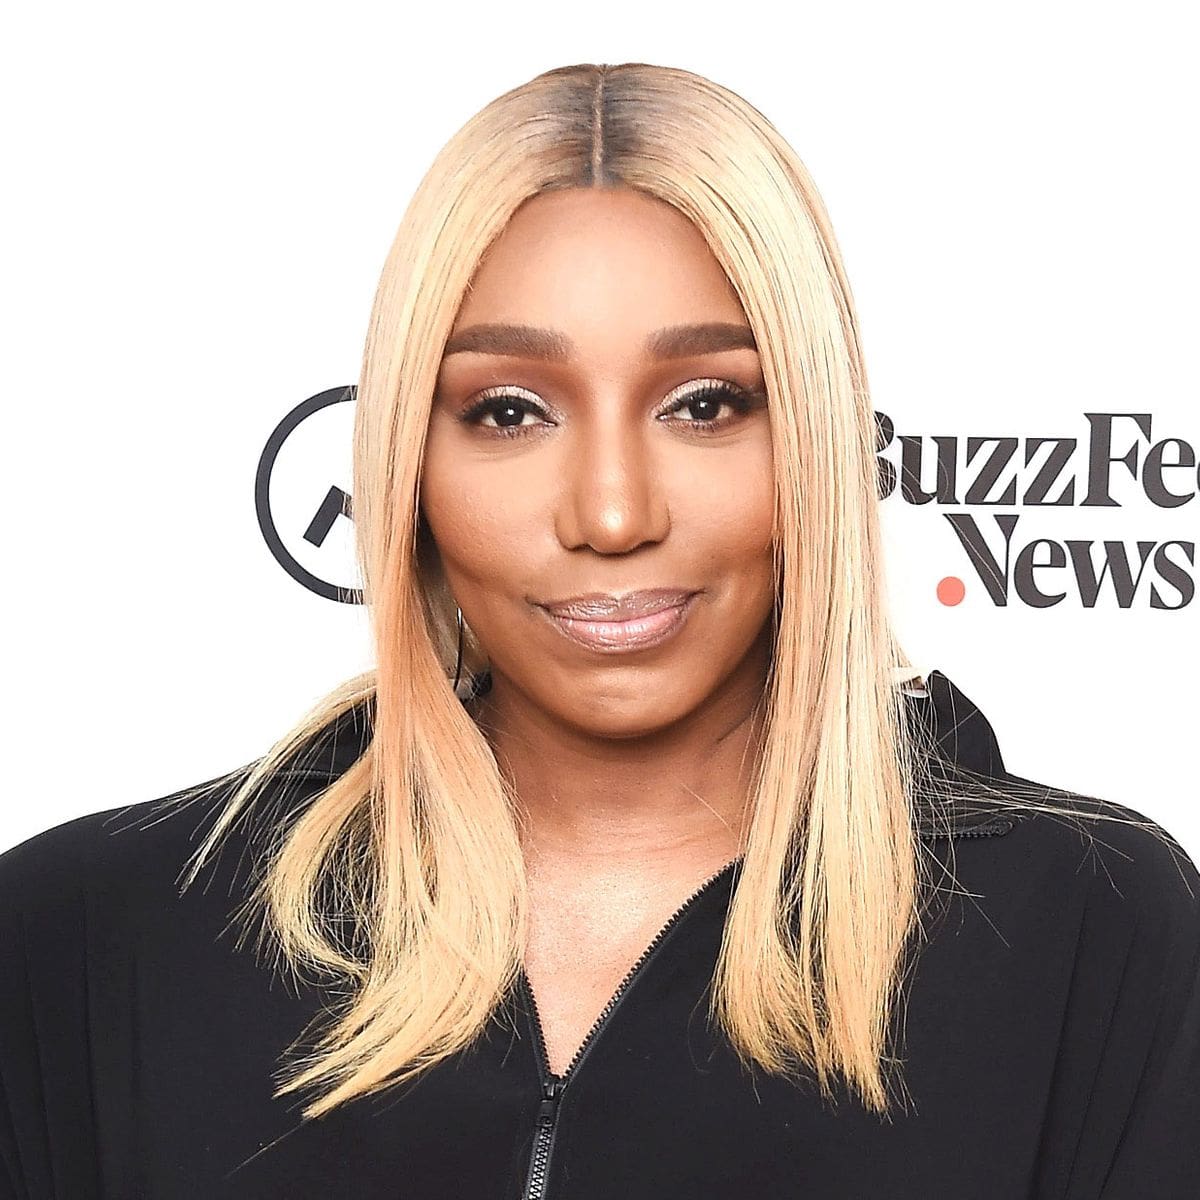 NeNe Leakes Just Dropped An Important Message On Social Media - See Her YouTube Video